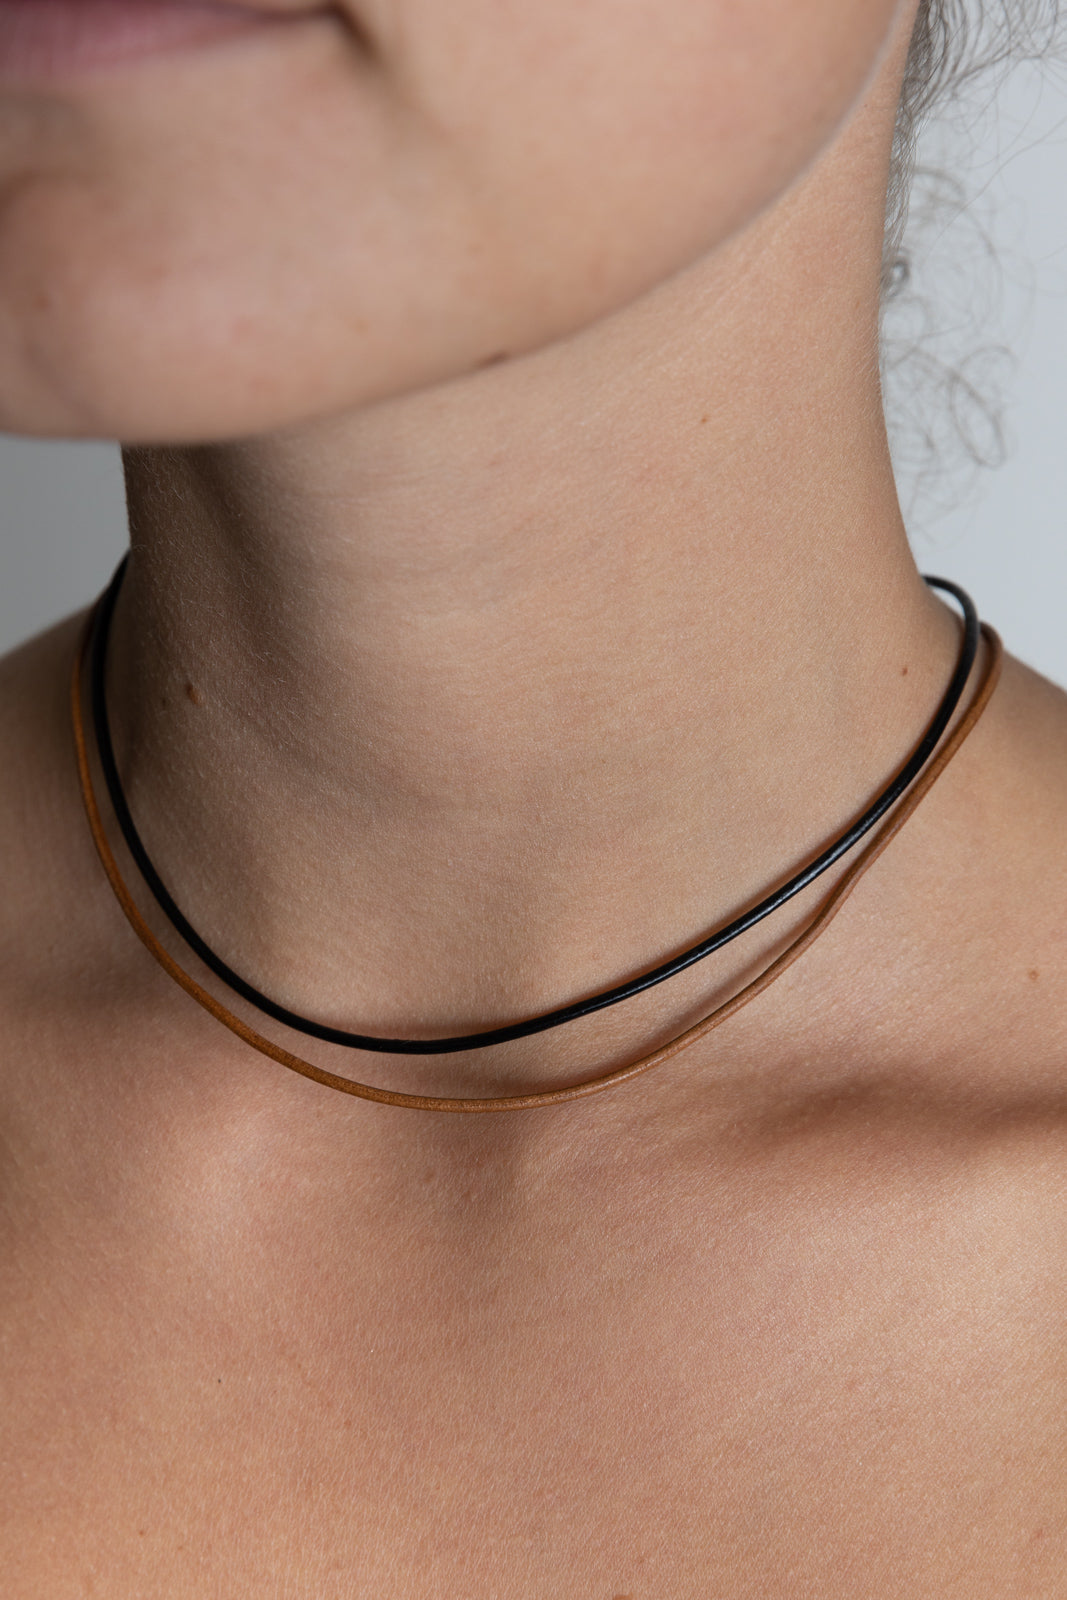 Leather Cord Necklace Black Braided 4 MM - Sizes 14